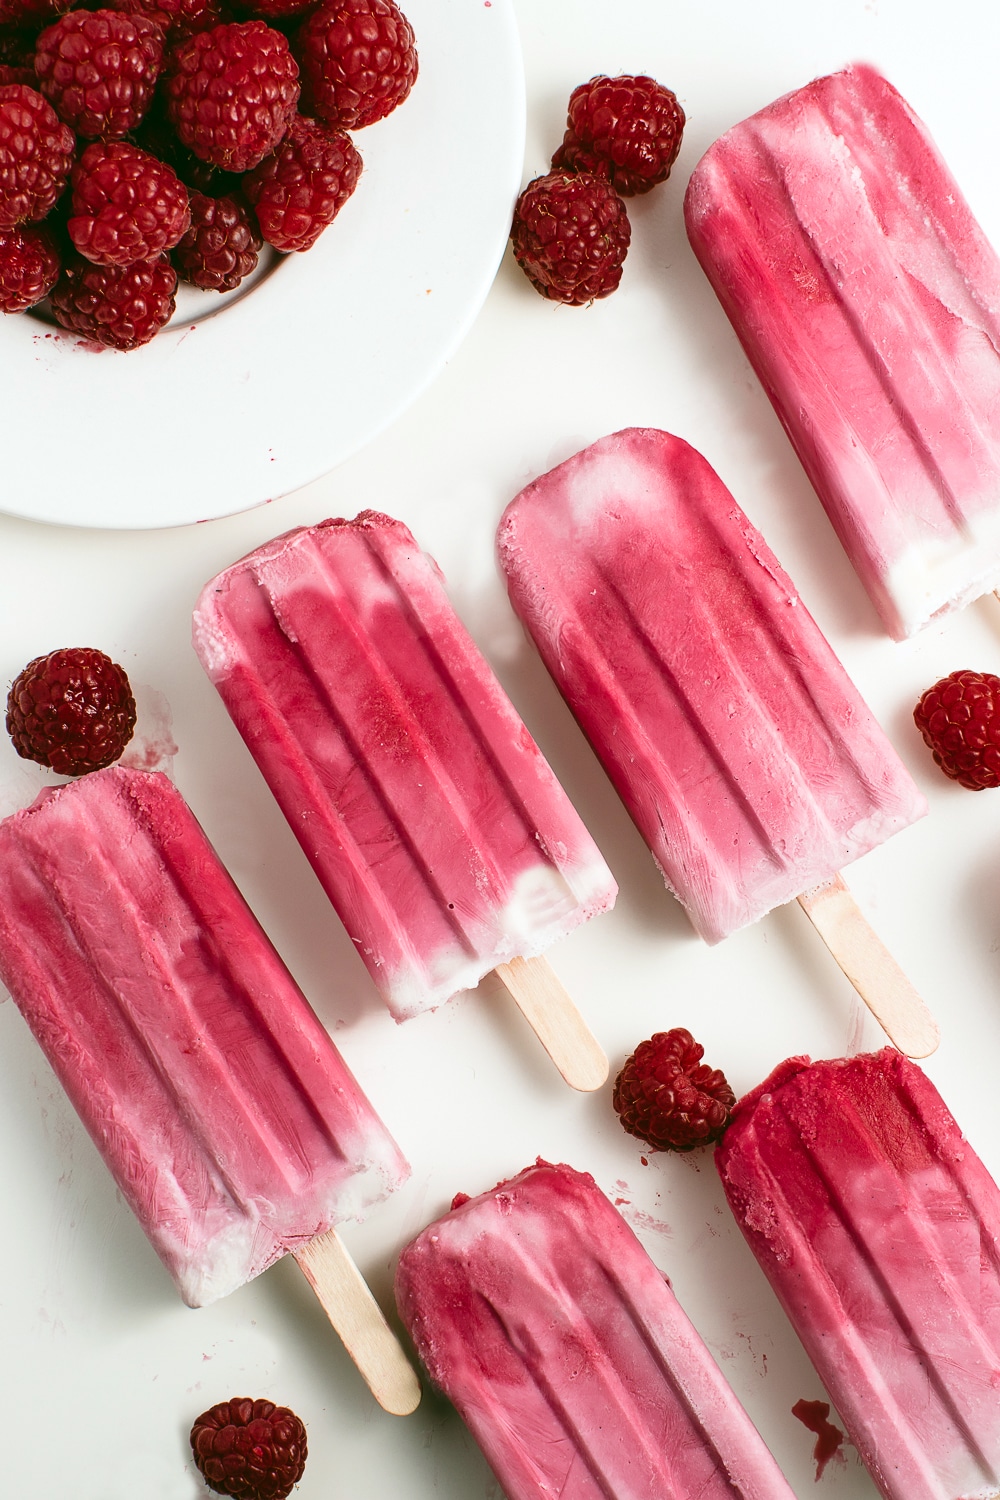 Pink and white raspberry ripple ice cream bars on a white background